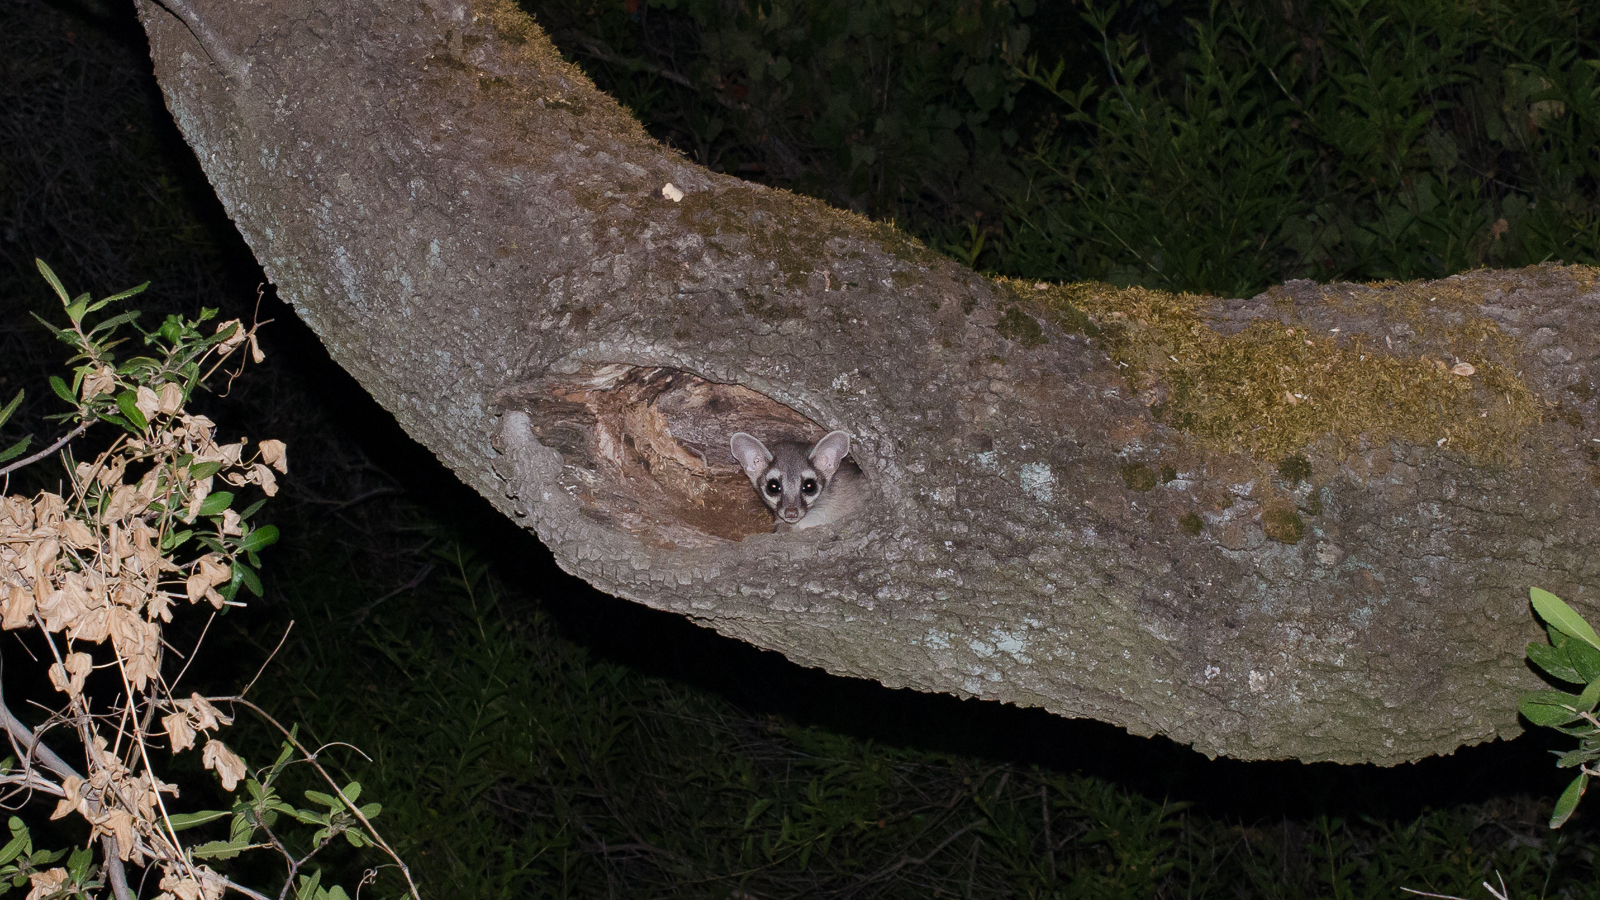 This ringtail has found a good den spot in a tree. Photo © Daniel Neal, CC BY 2.0